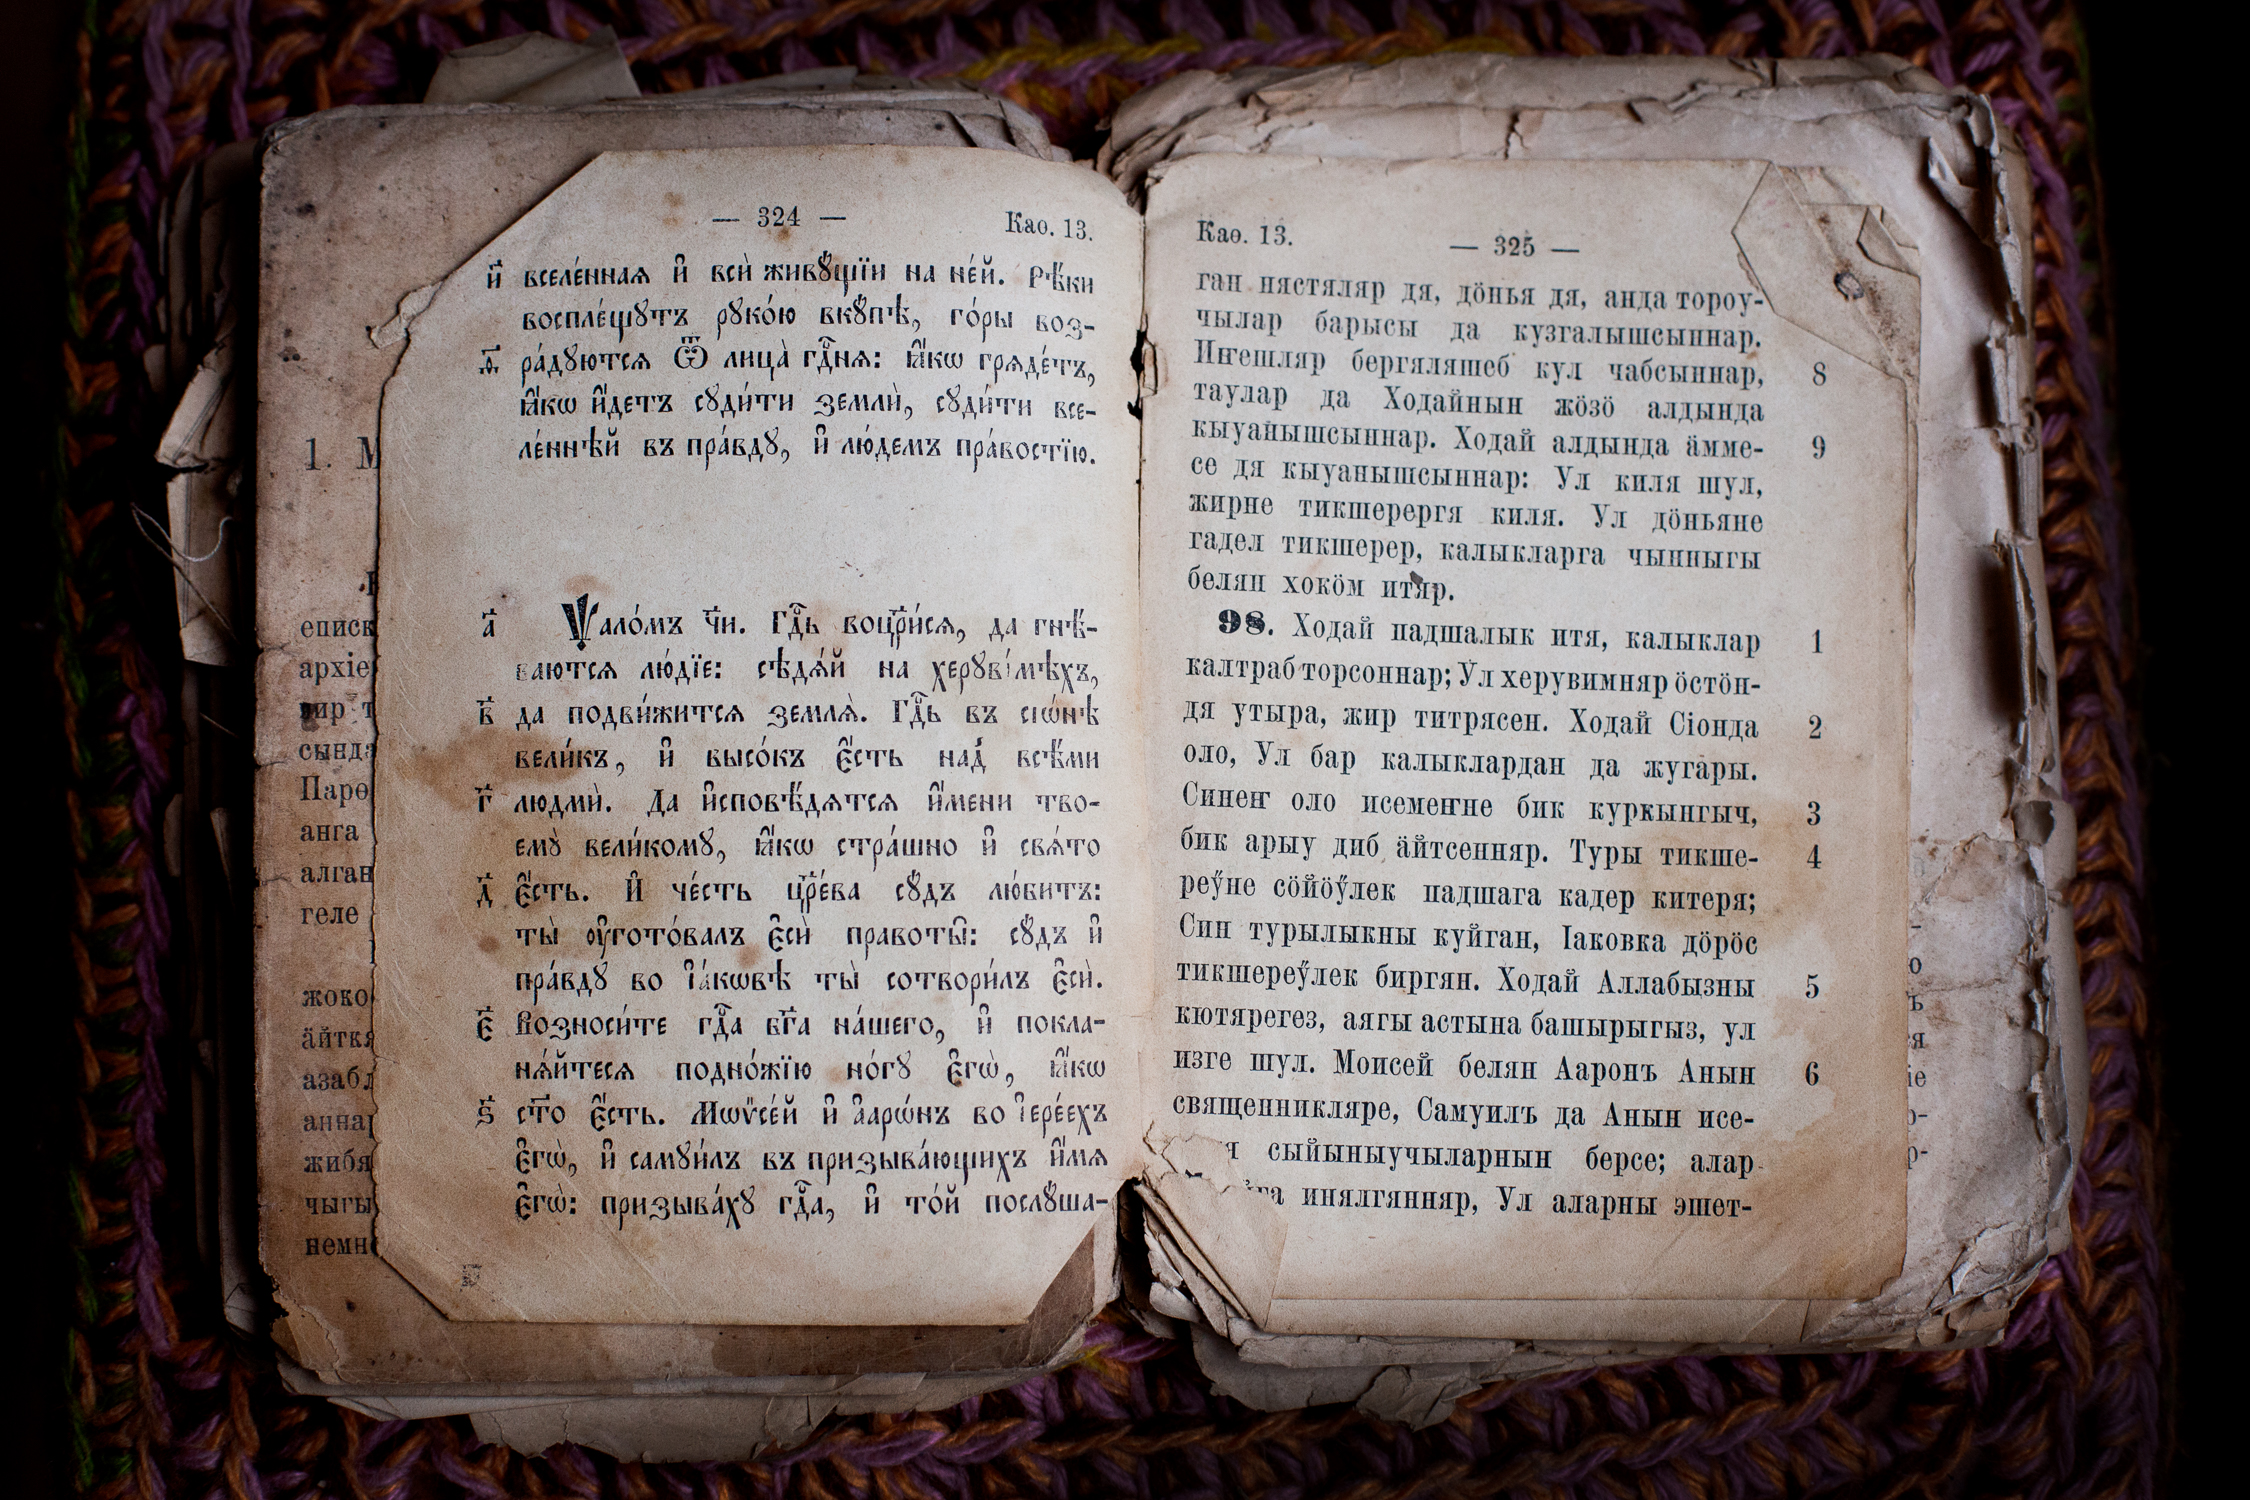 A dual-language bible, Kryashen on the left and Tatar on the right.